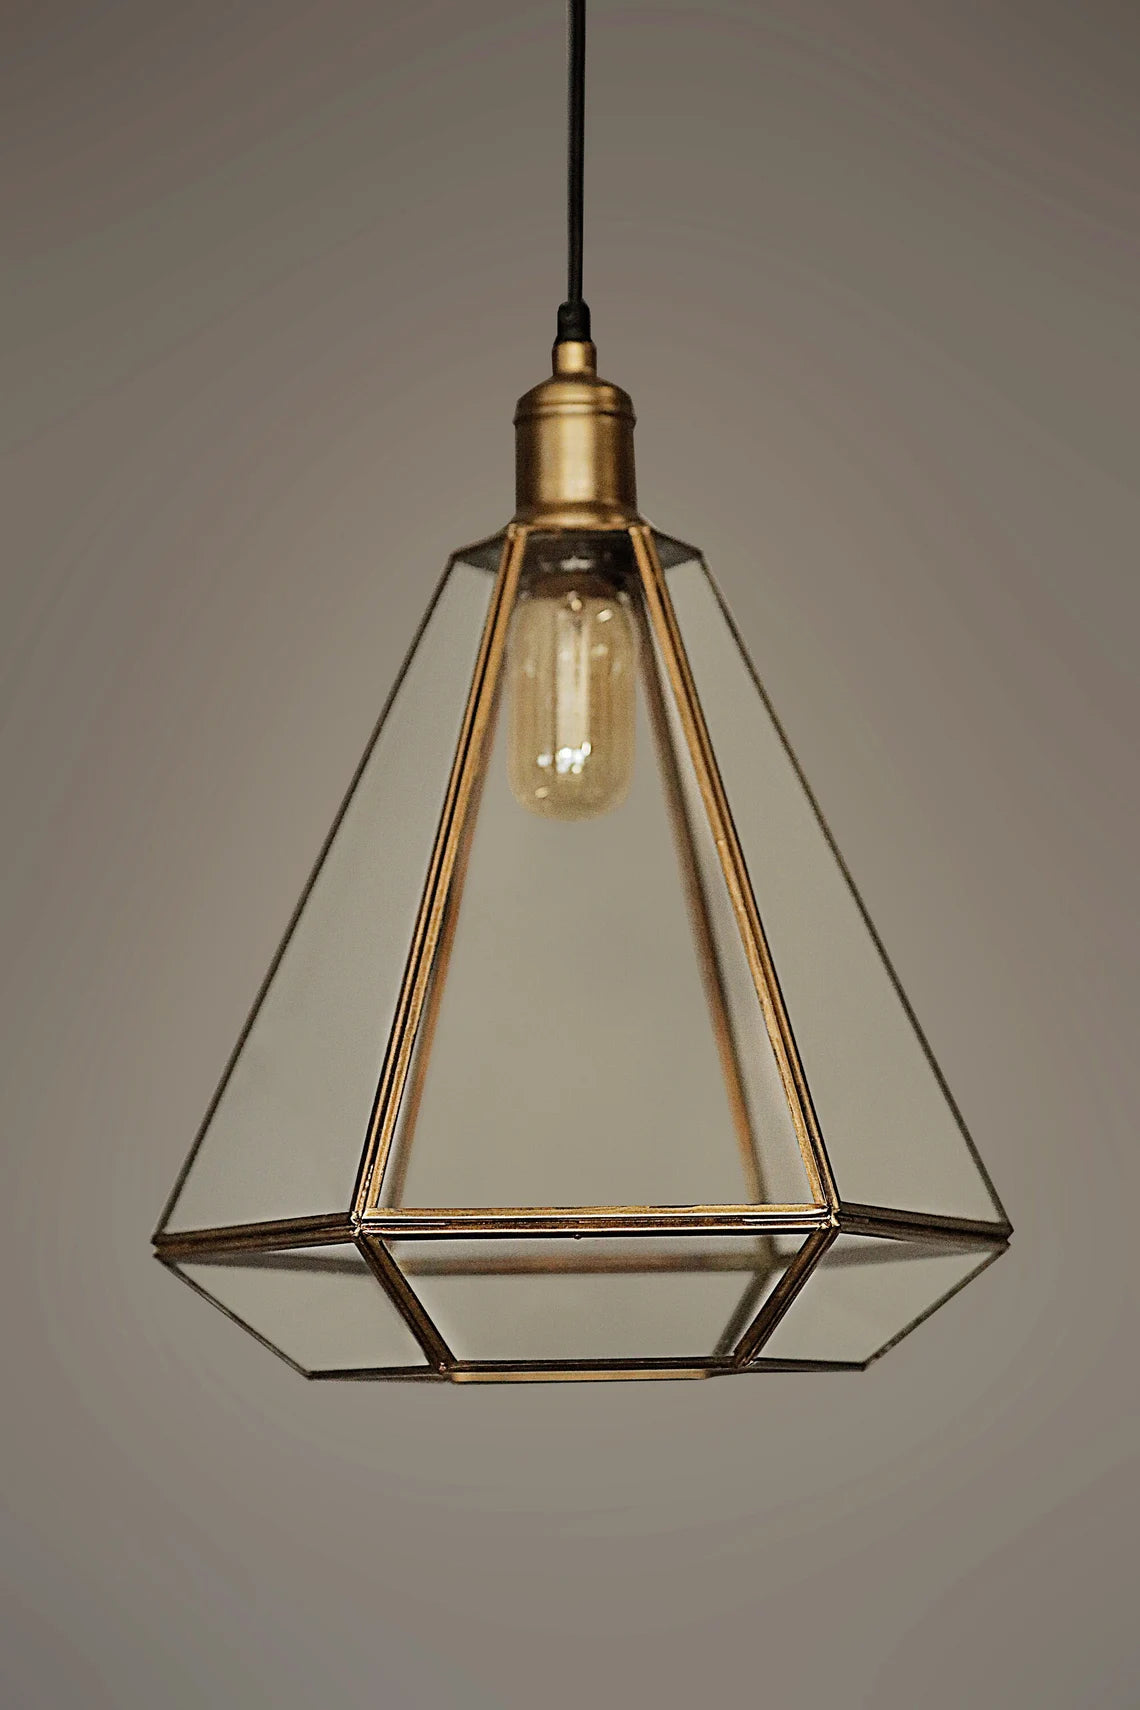 Studio 35 Brass, Glass and Iron Pendant Light (Antique Finish Brass, Iron and Clear Glass)